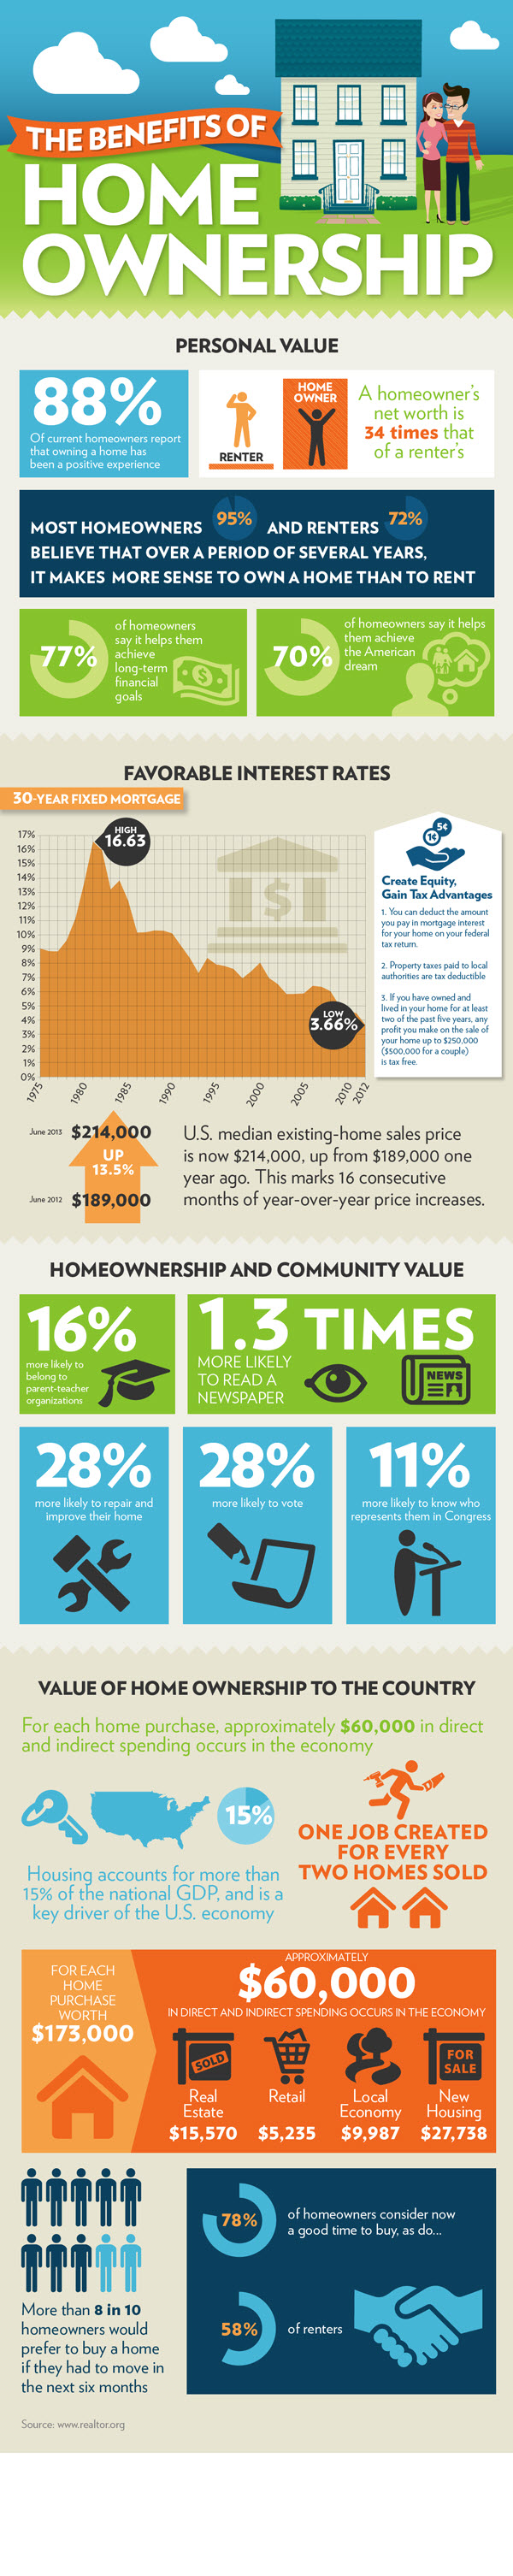 The Benefits of Homeownership